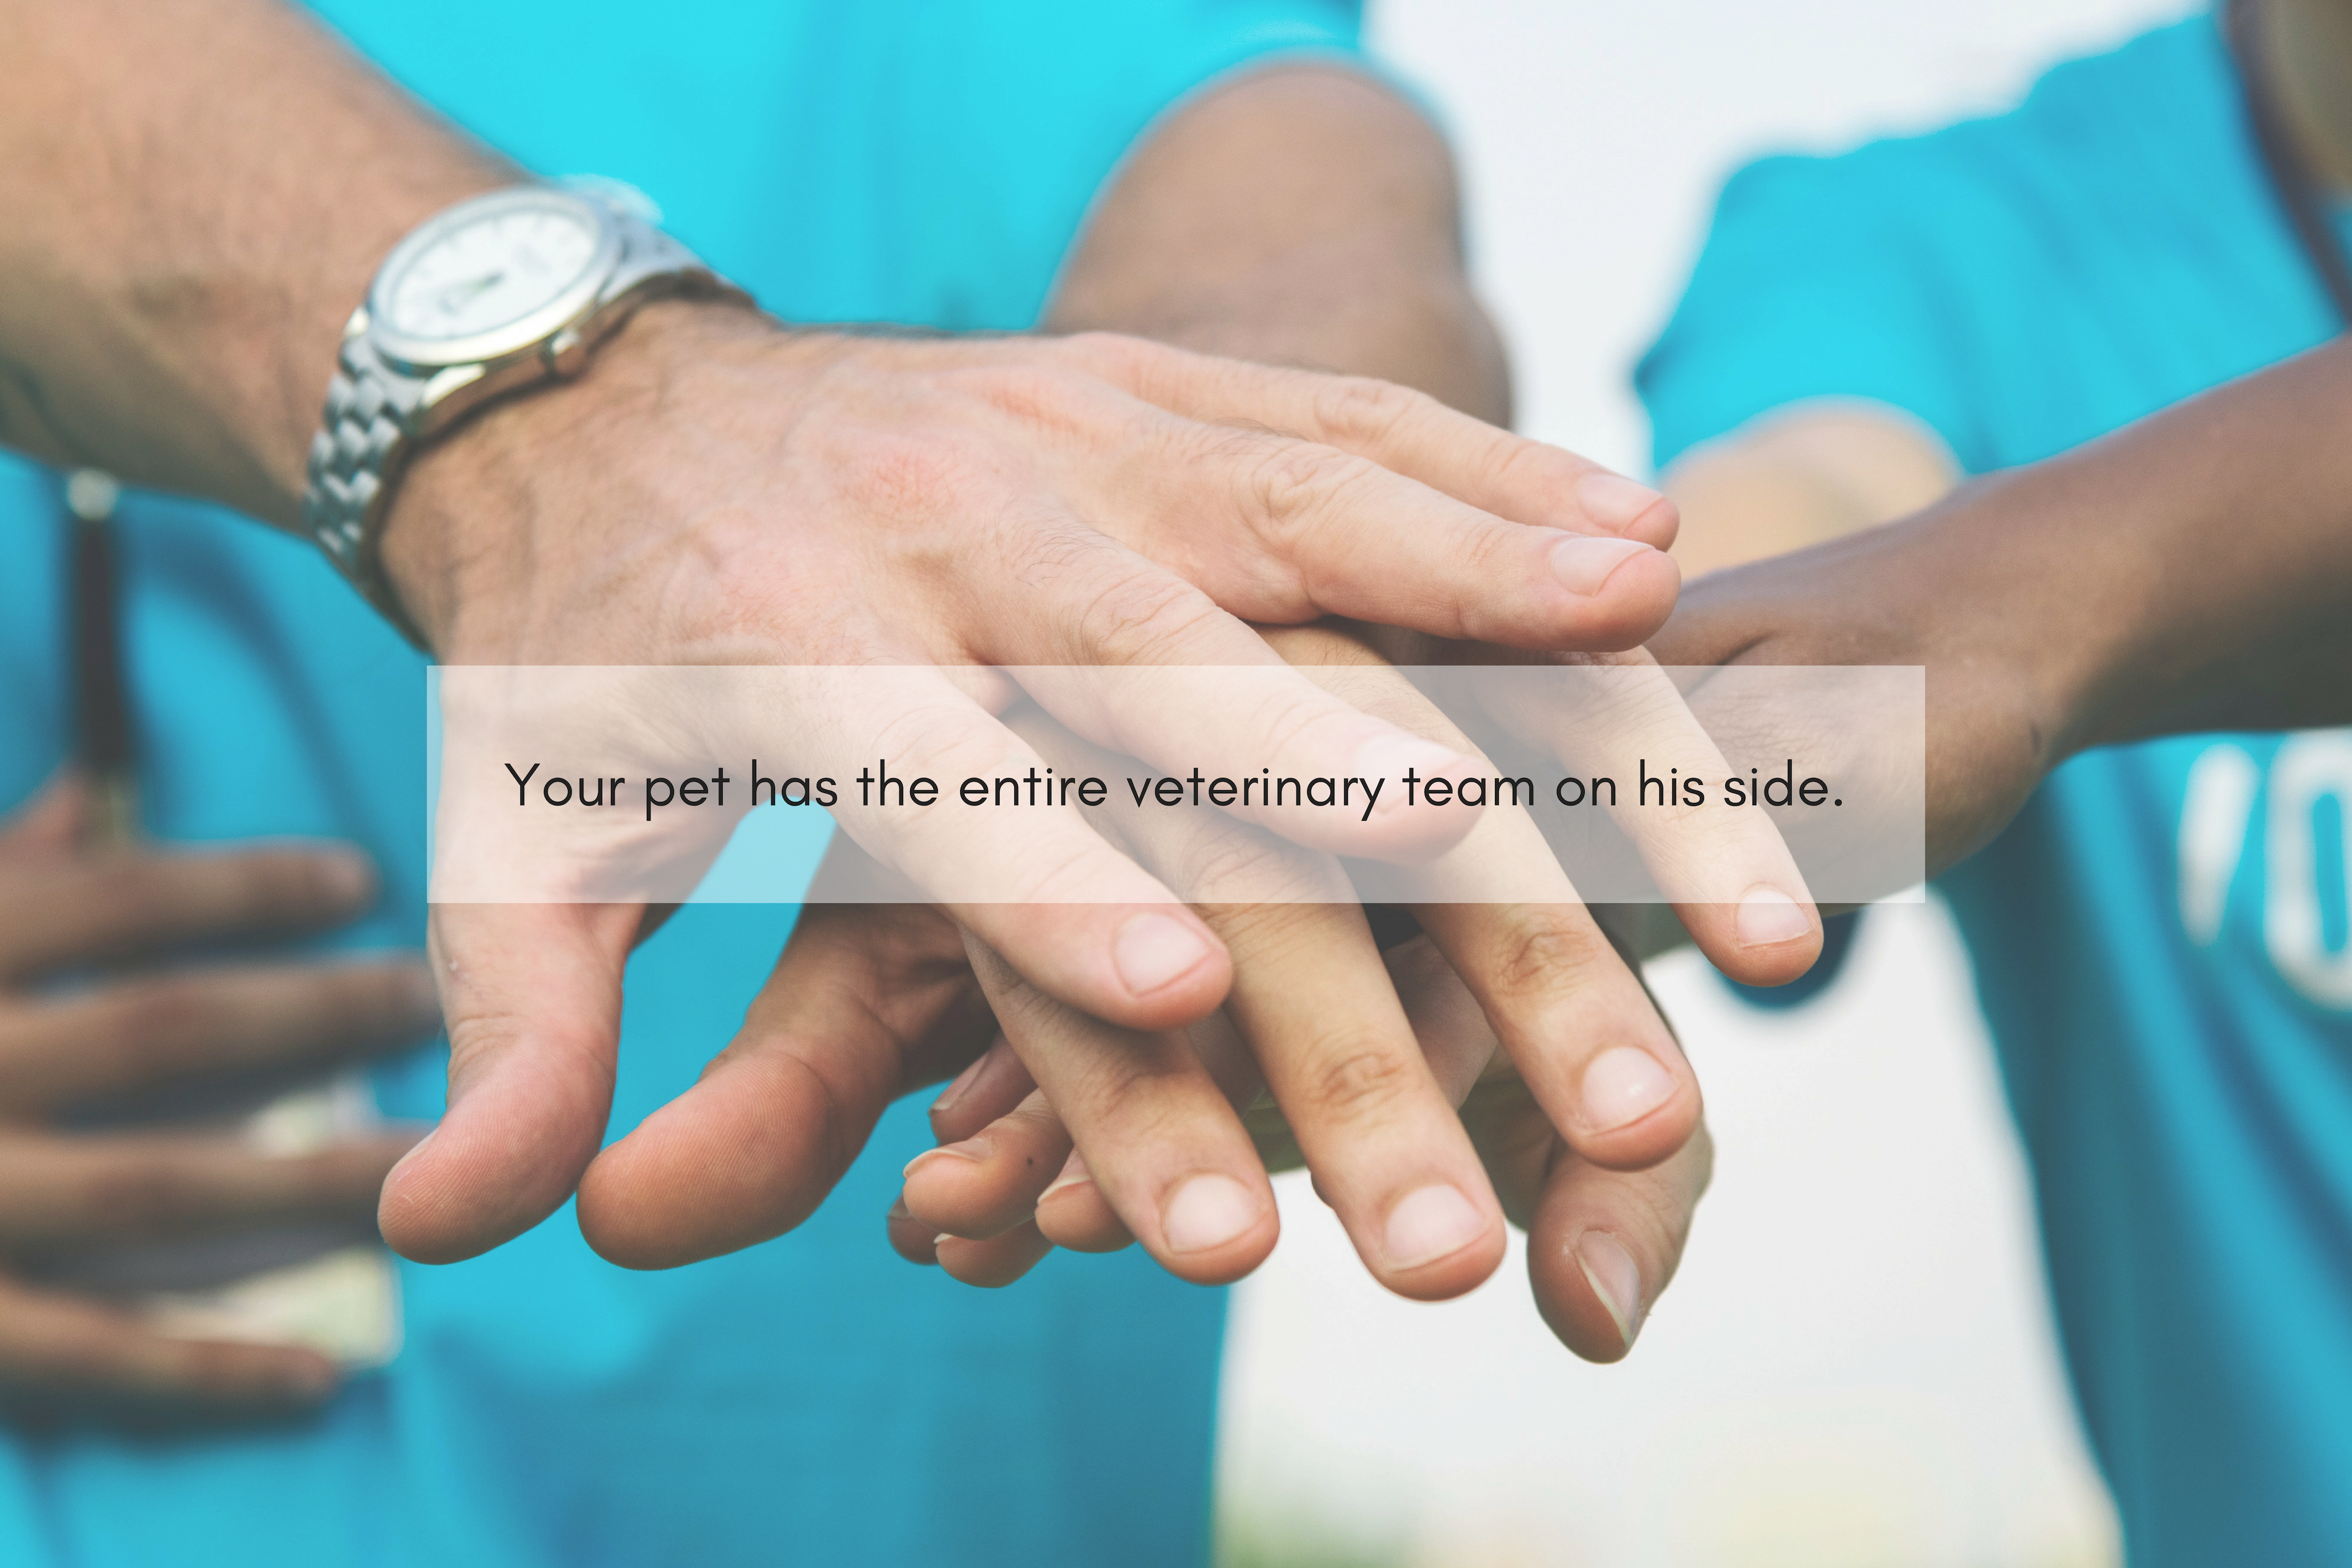 Your pet has the entire veterinary team on his side.